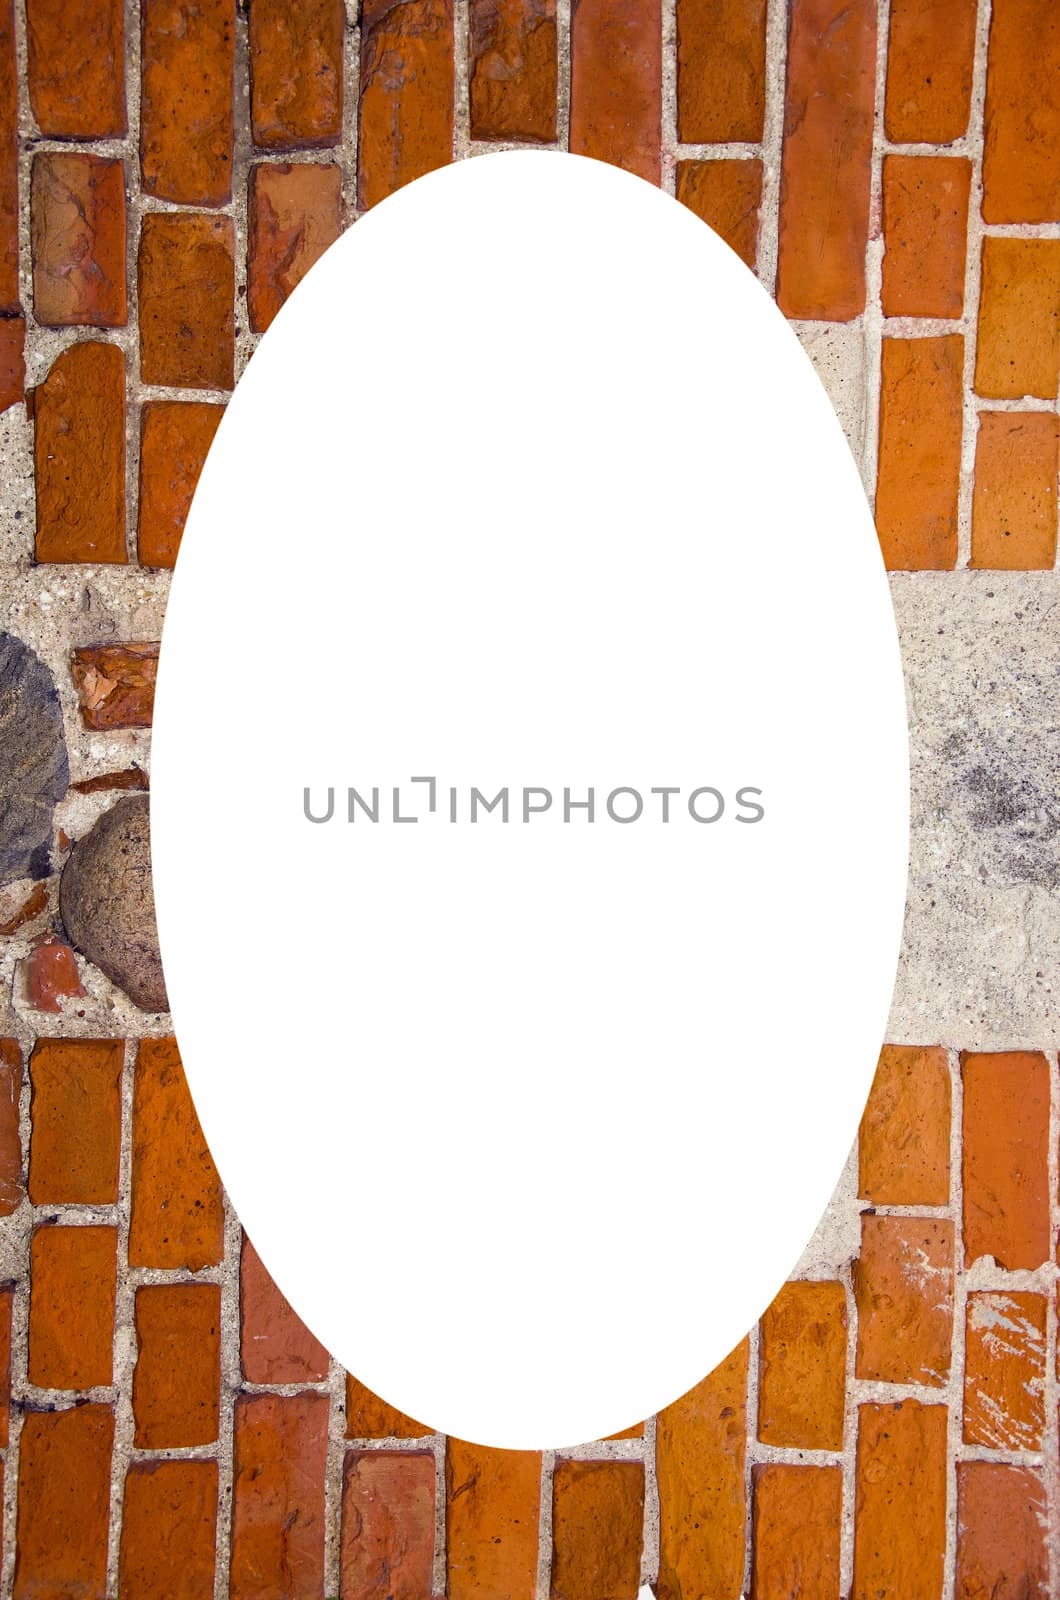 red brick stones wall and white oval in center by sauletas